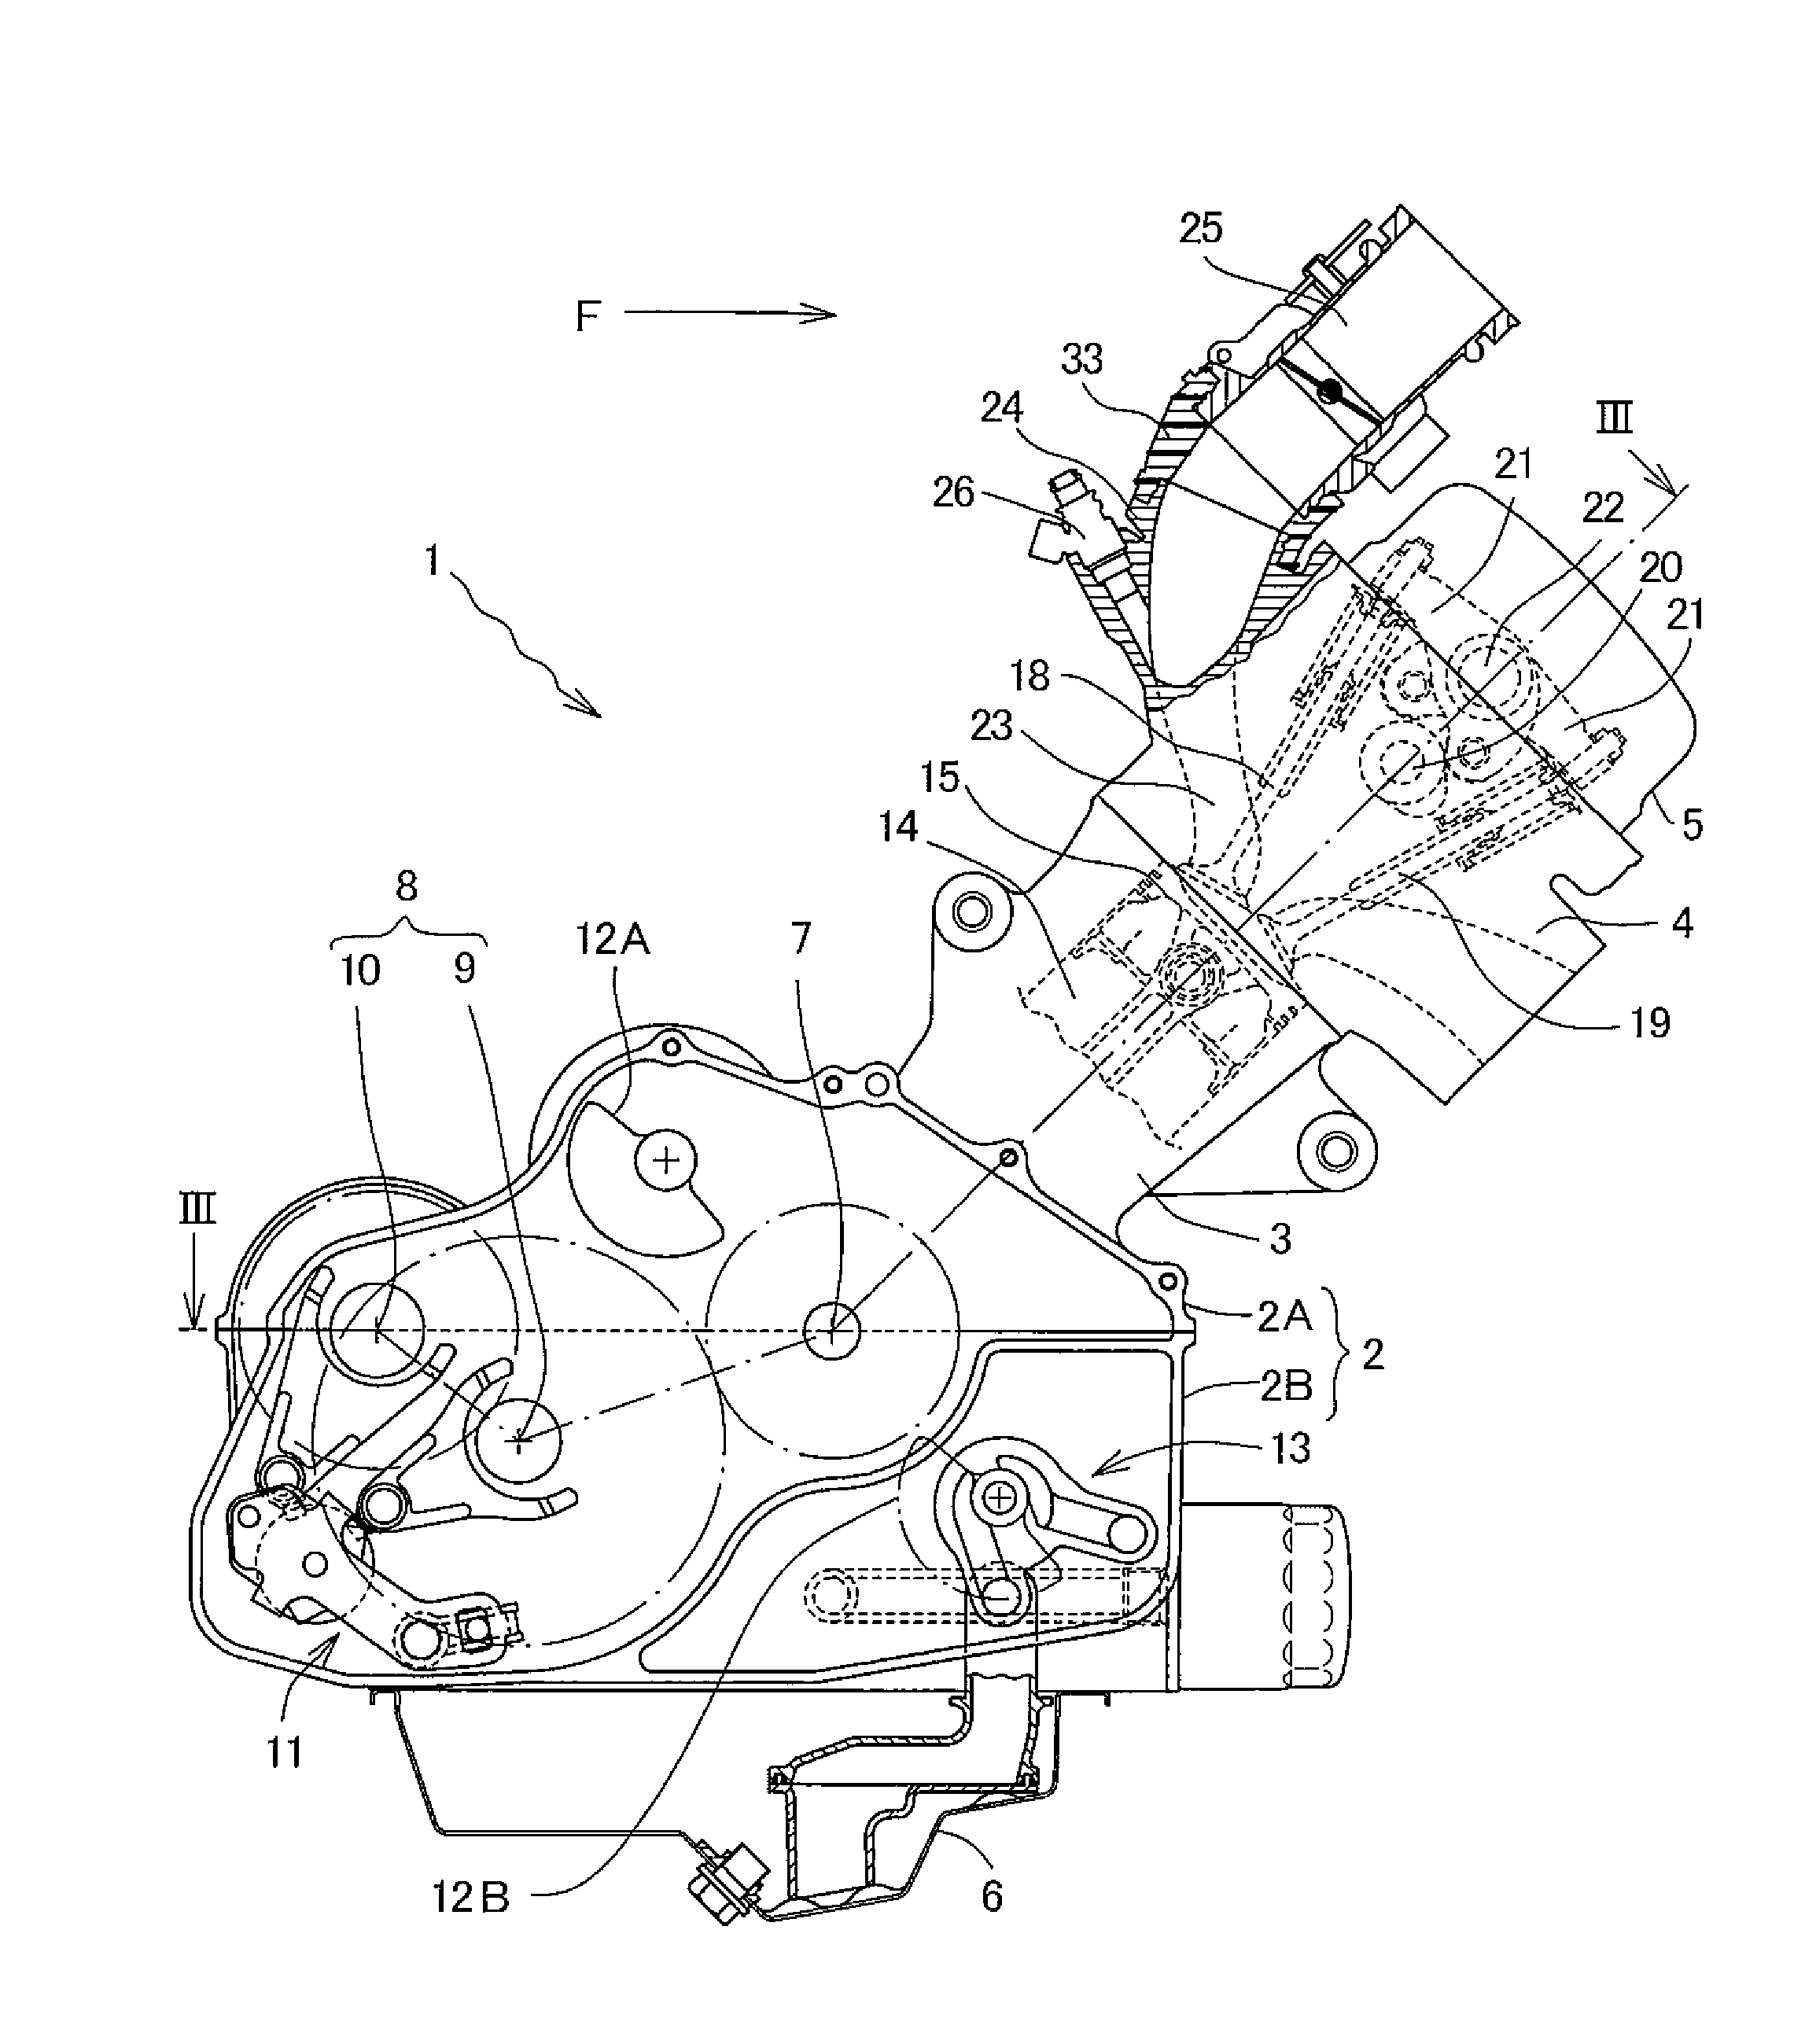 Oil storage structure for engine, engine incorporating same, and vehicle incorporating same